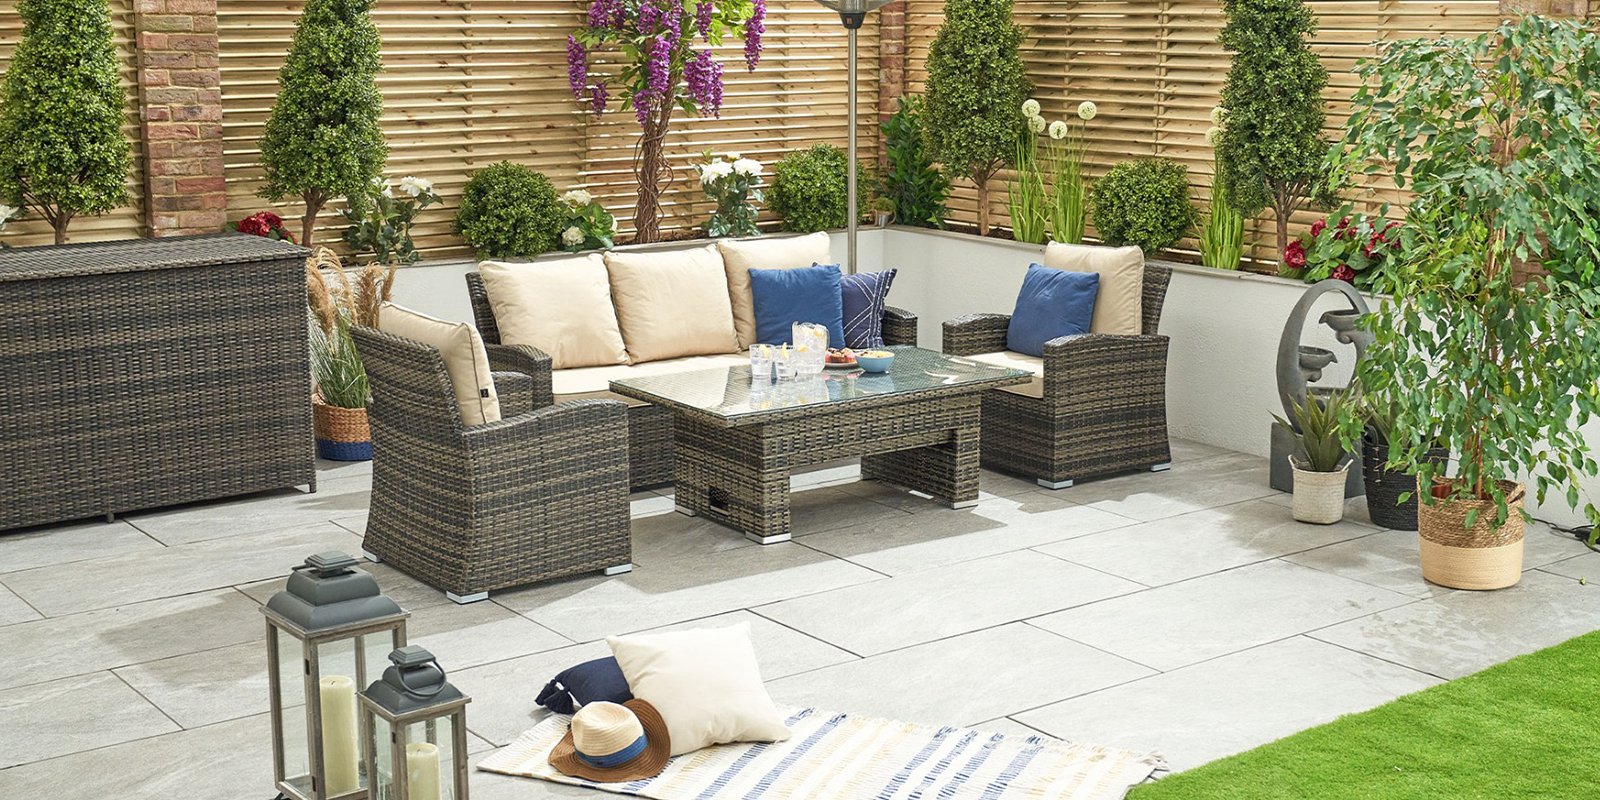 The Risks of Buying Used Garden Furniture